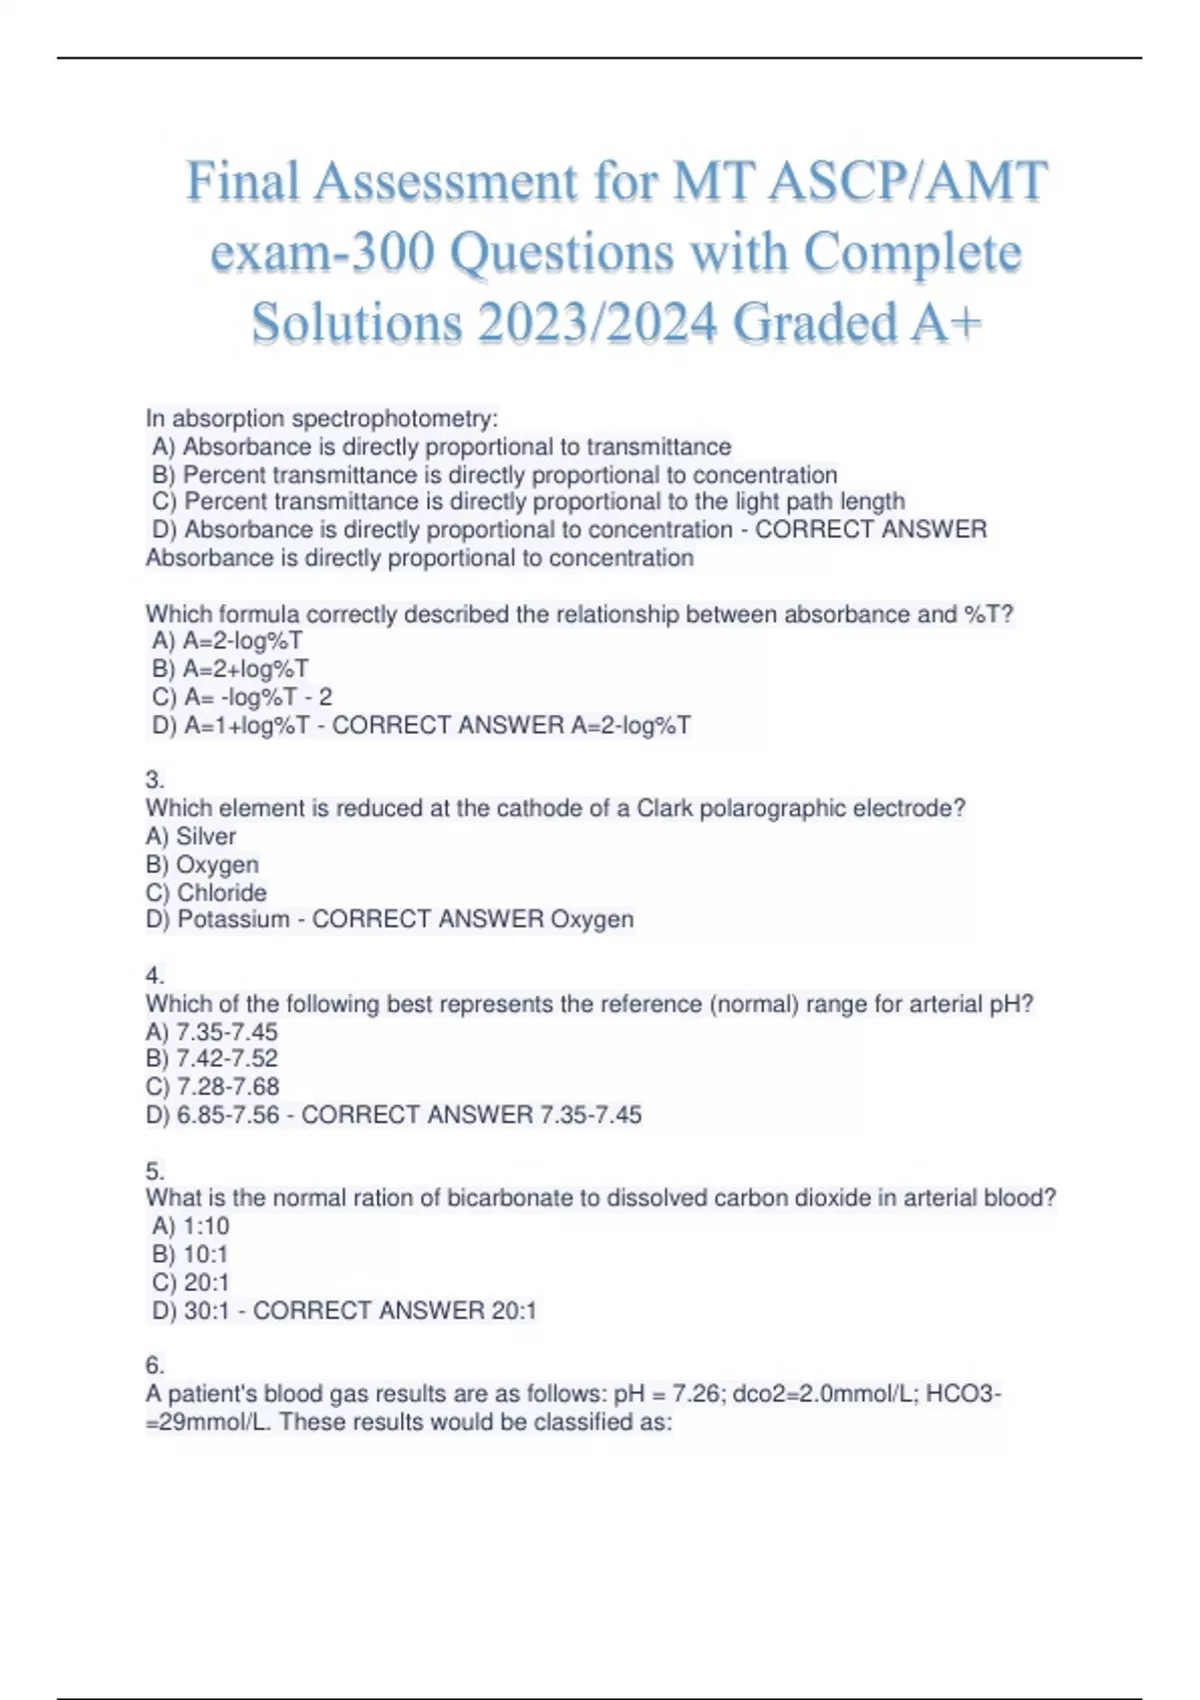 Final Assessment for MT ASCP/AMT exam300 Questions with Complete